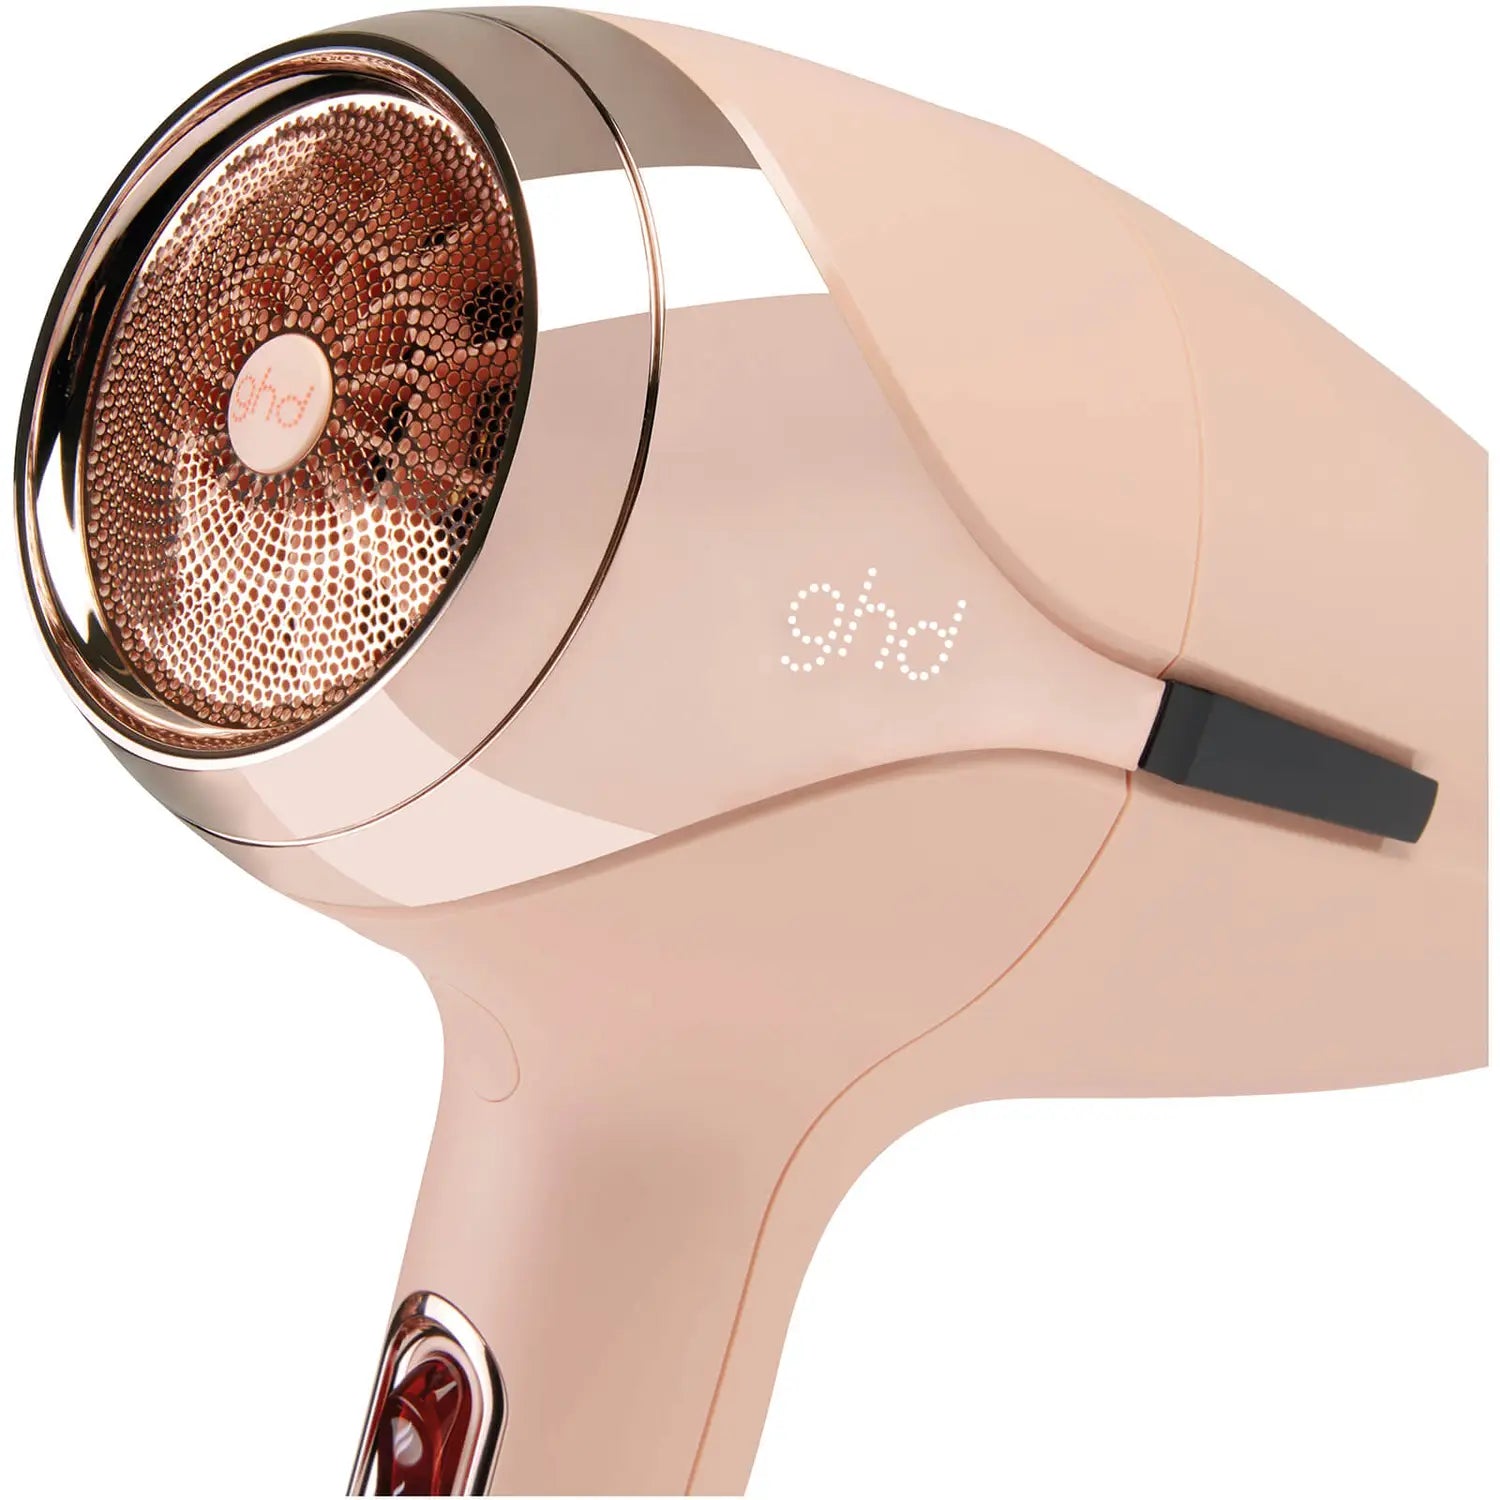 GHD HELIOS™ PROFESSIONAL HAIR DRYER - PINK COLLECTION